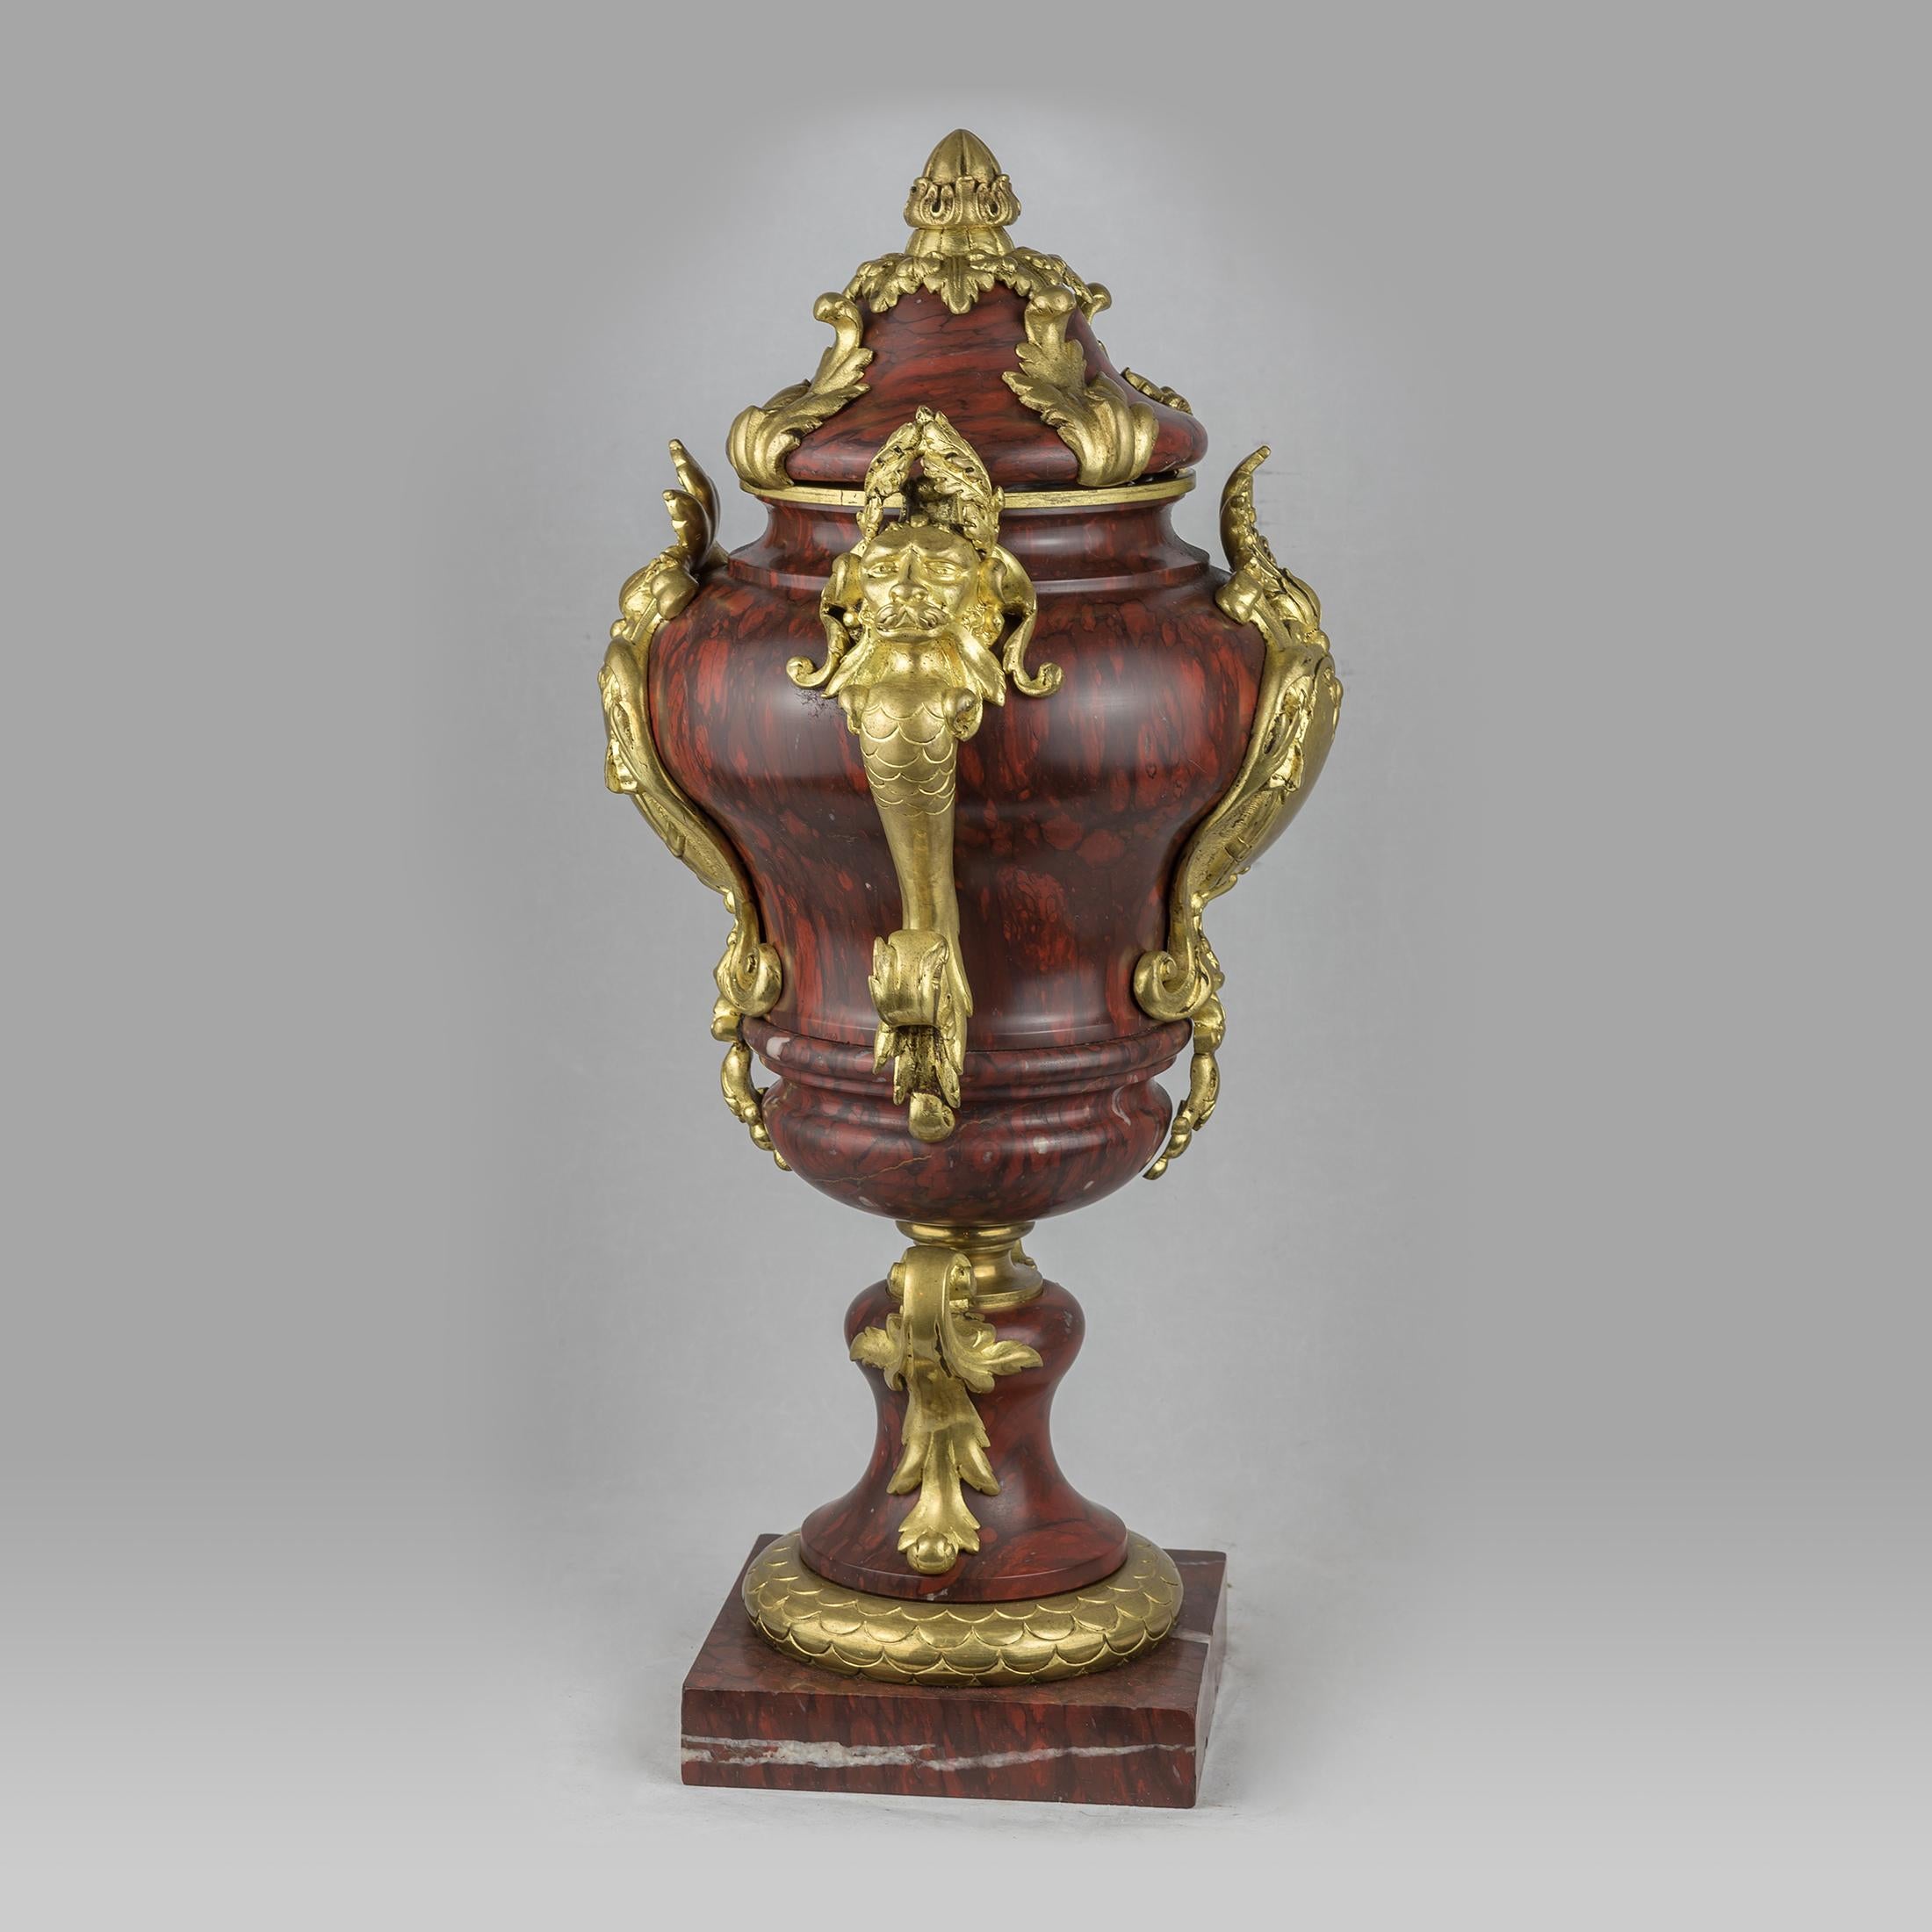 A pair of fine quality French ormolu-mounted rouge marble urns and cover, each with a bulbous body on a stepped plinth 

Origin: French
Date: 19th century
Dimension: 19 in x 9 in.